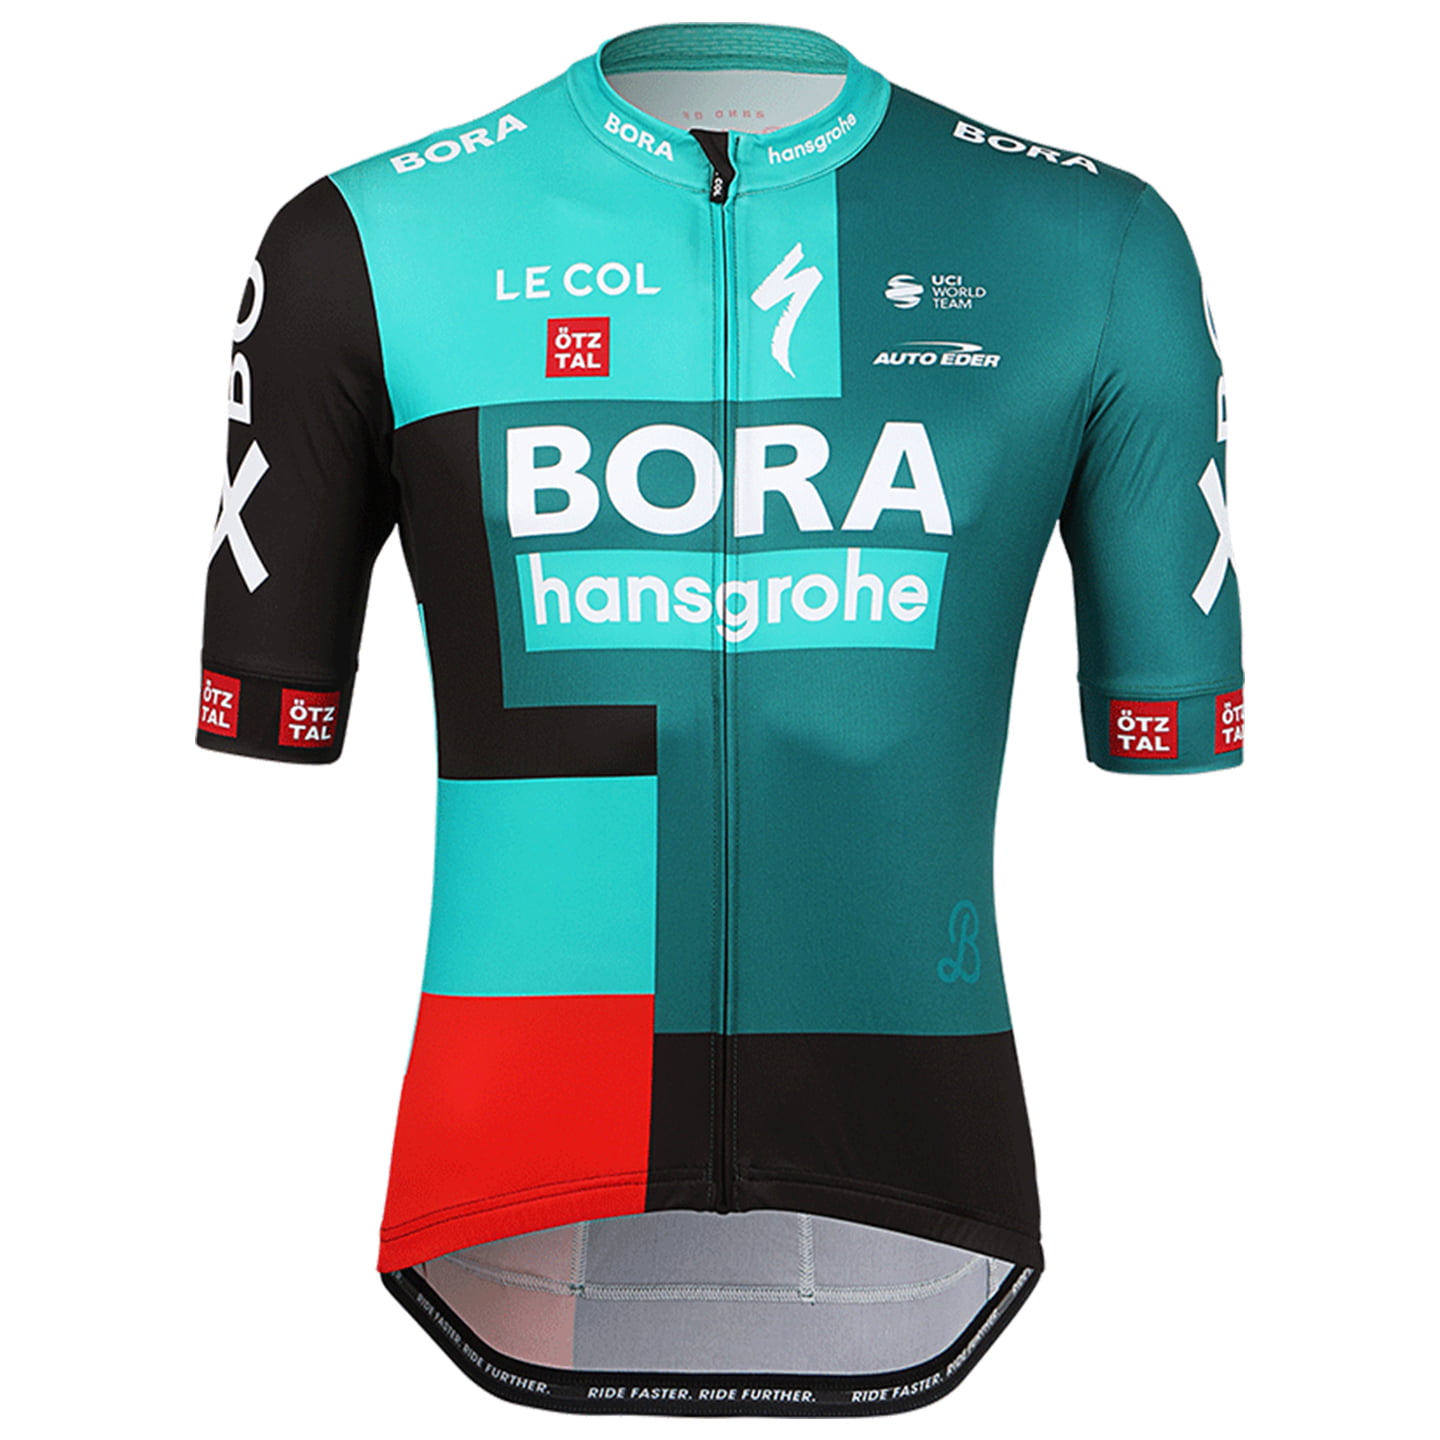 BORA-hansgrohe 2022 Short Sleeve Jersey, for men, size L, Cycling shirt, Cycle clothing